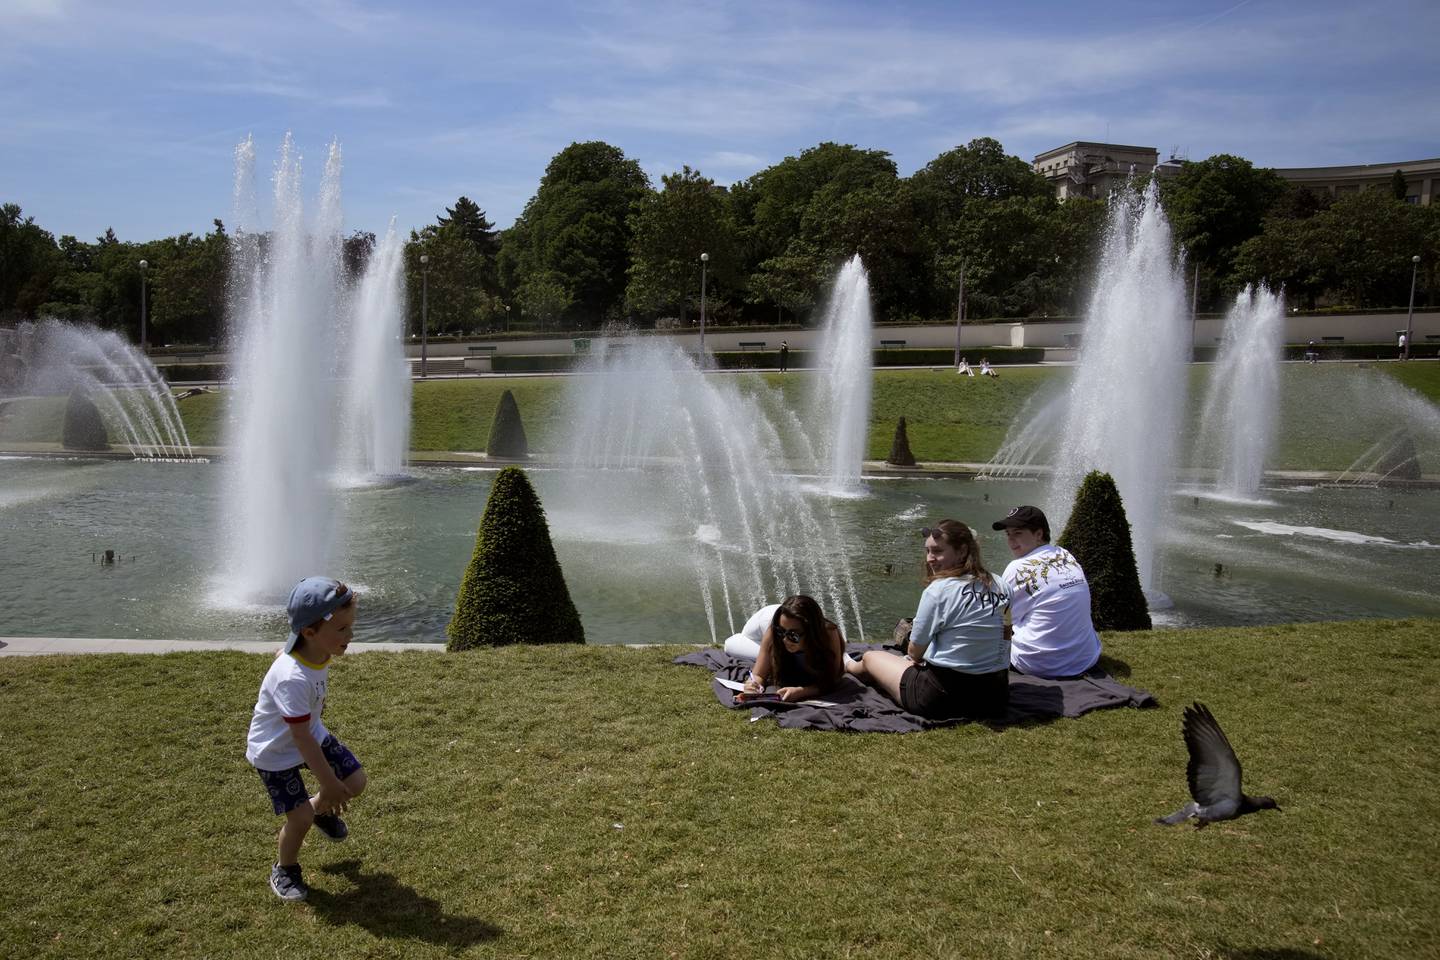 People cool down near the fountains of the Trocadero gardens in Paris, France, Wednesday, May 18, 2022. The hot weather is expected to last for several days across the country. (AP Photo/Christophe Ena)